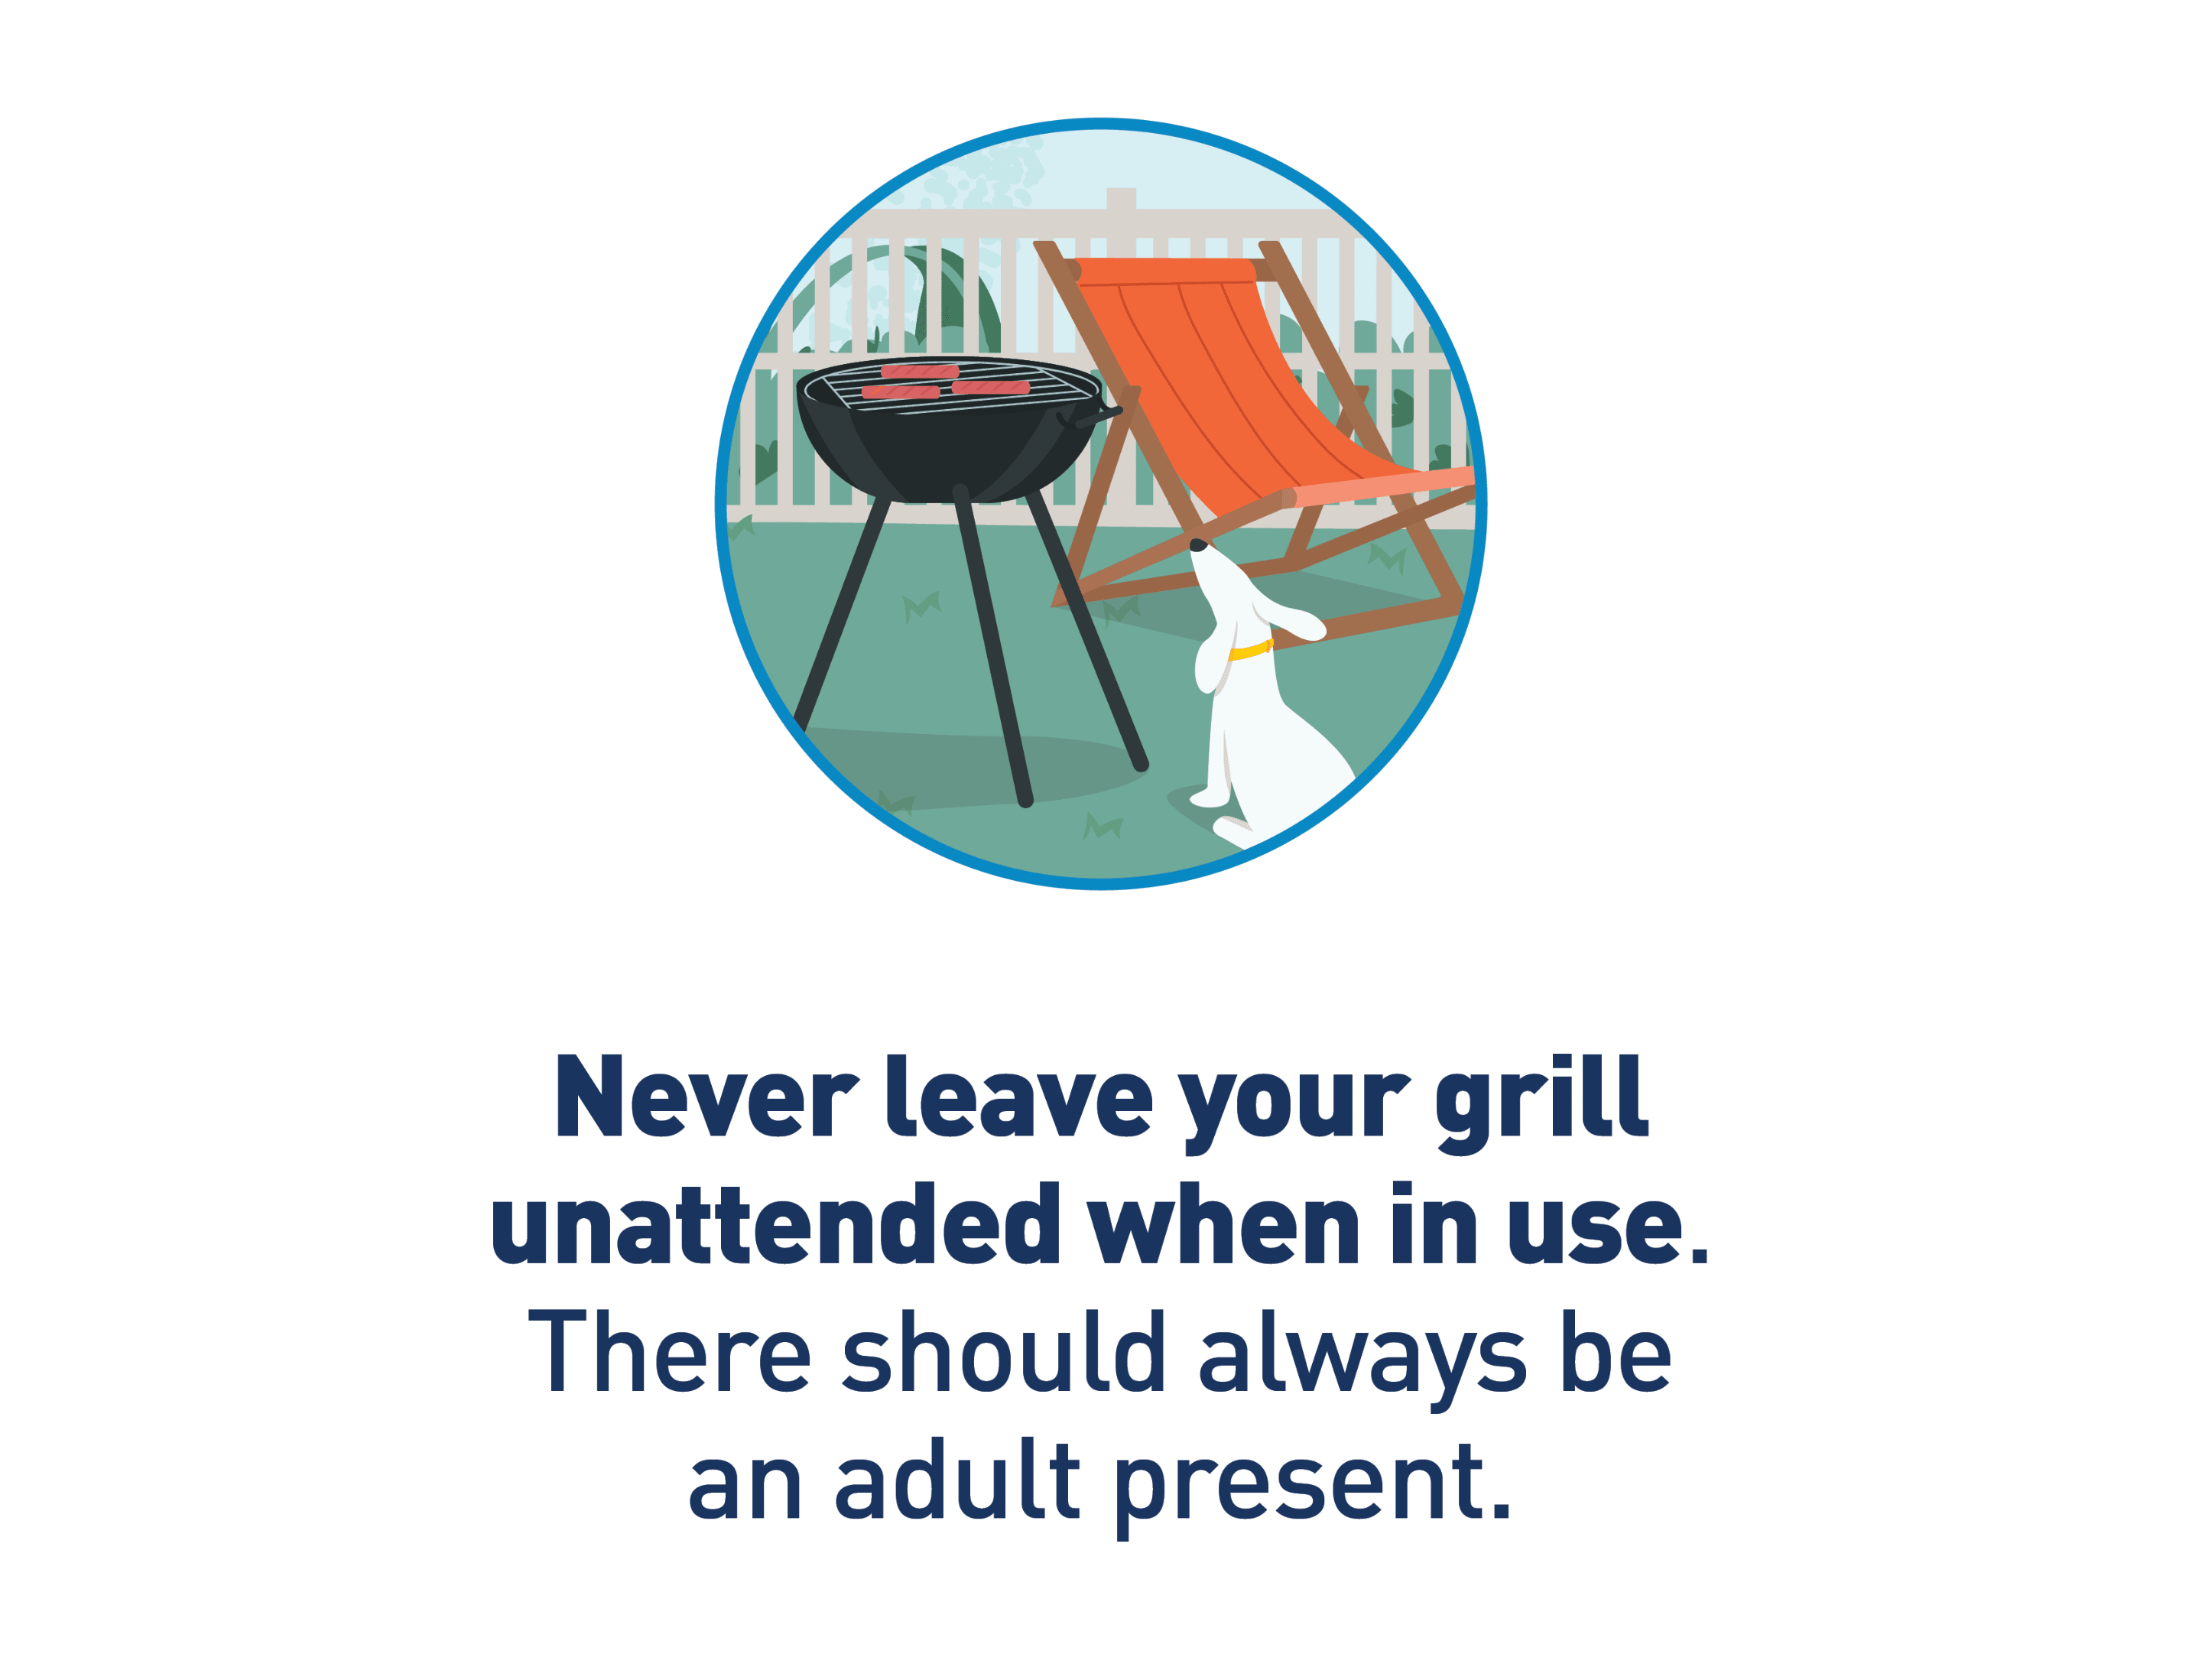 Image Description: Graphic of unattended barbecue. Text: Never leave your grill unattended when in use. There should always be an adult present.